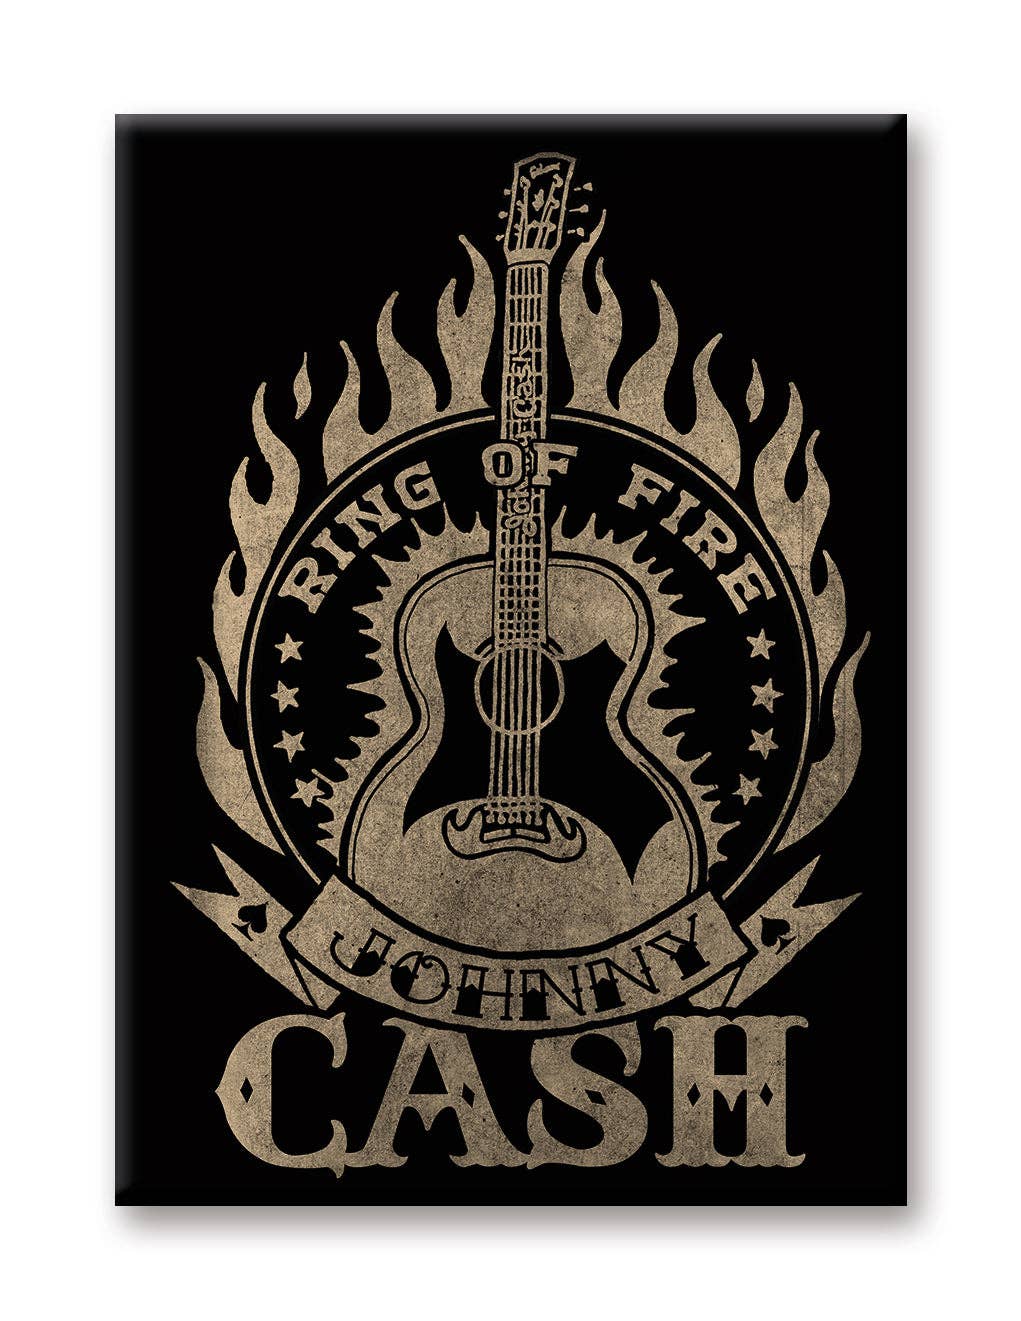 Johnny Cash - Ring of Fire Flat Magnet (2.5" x 3.5")